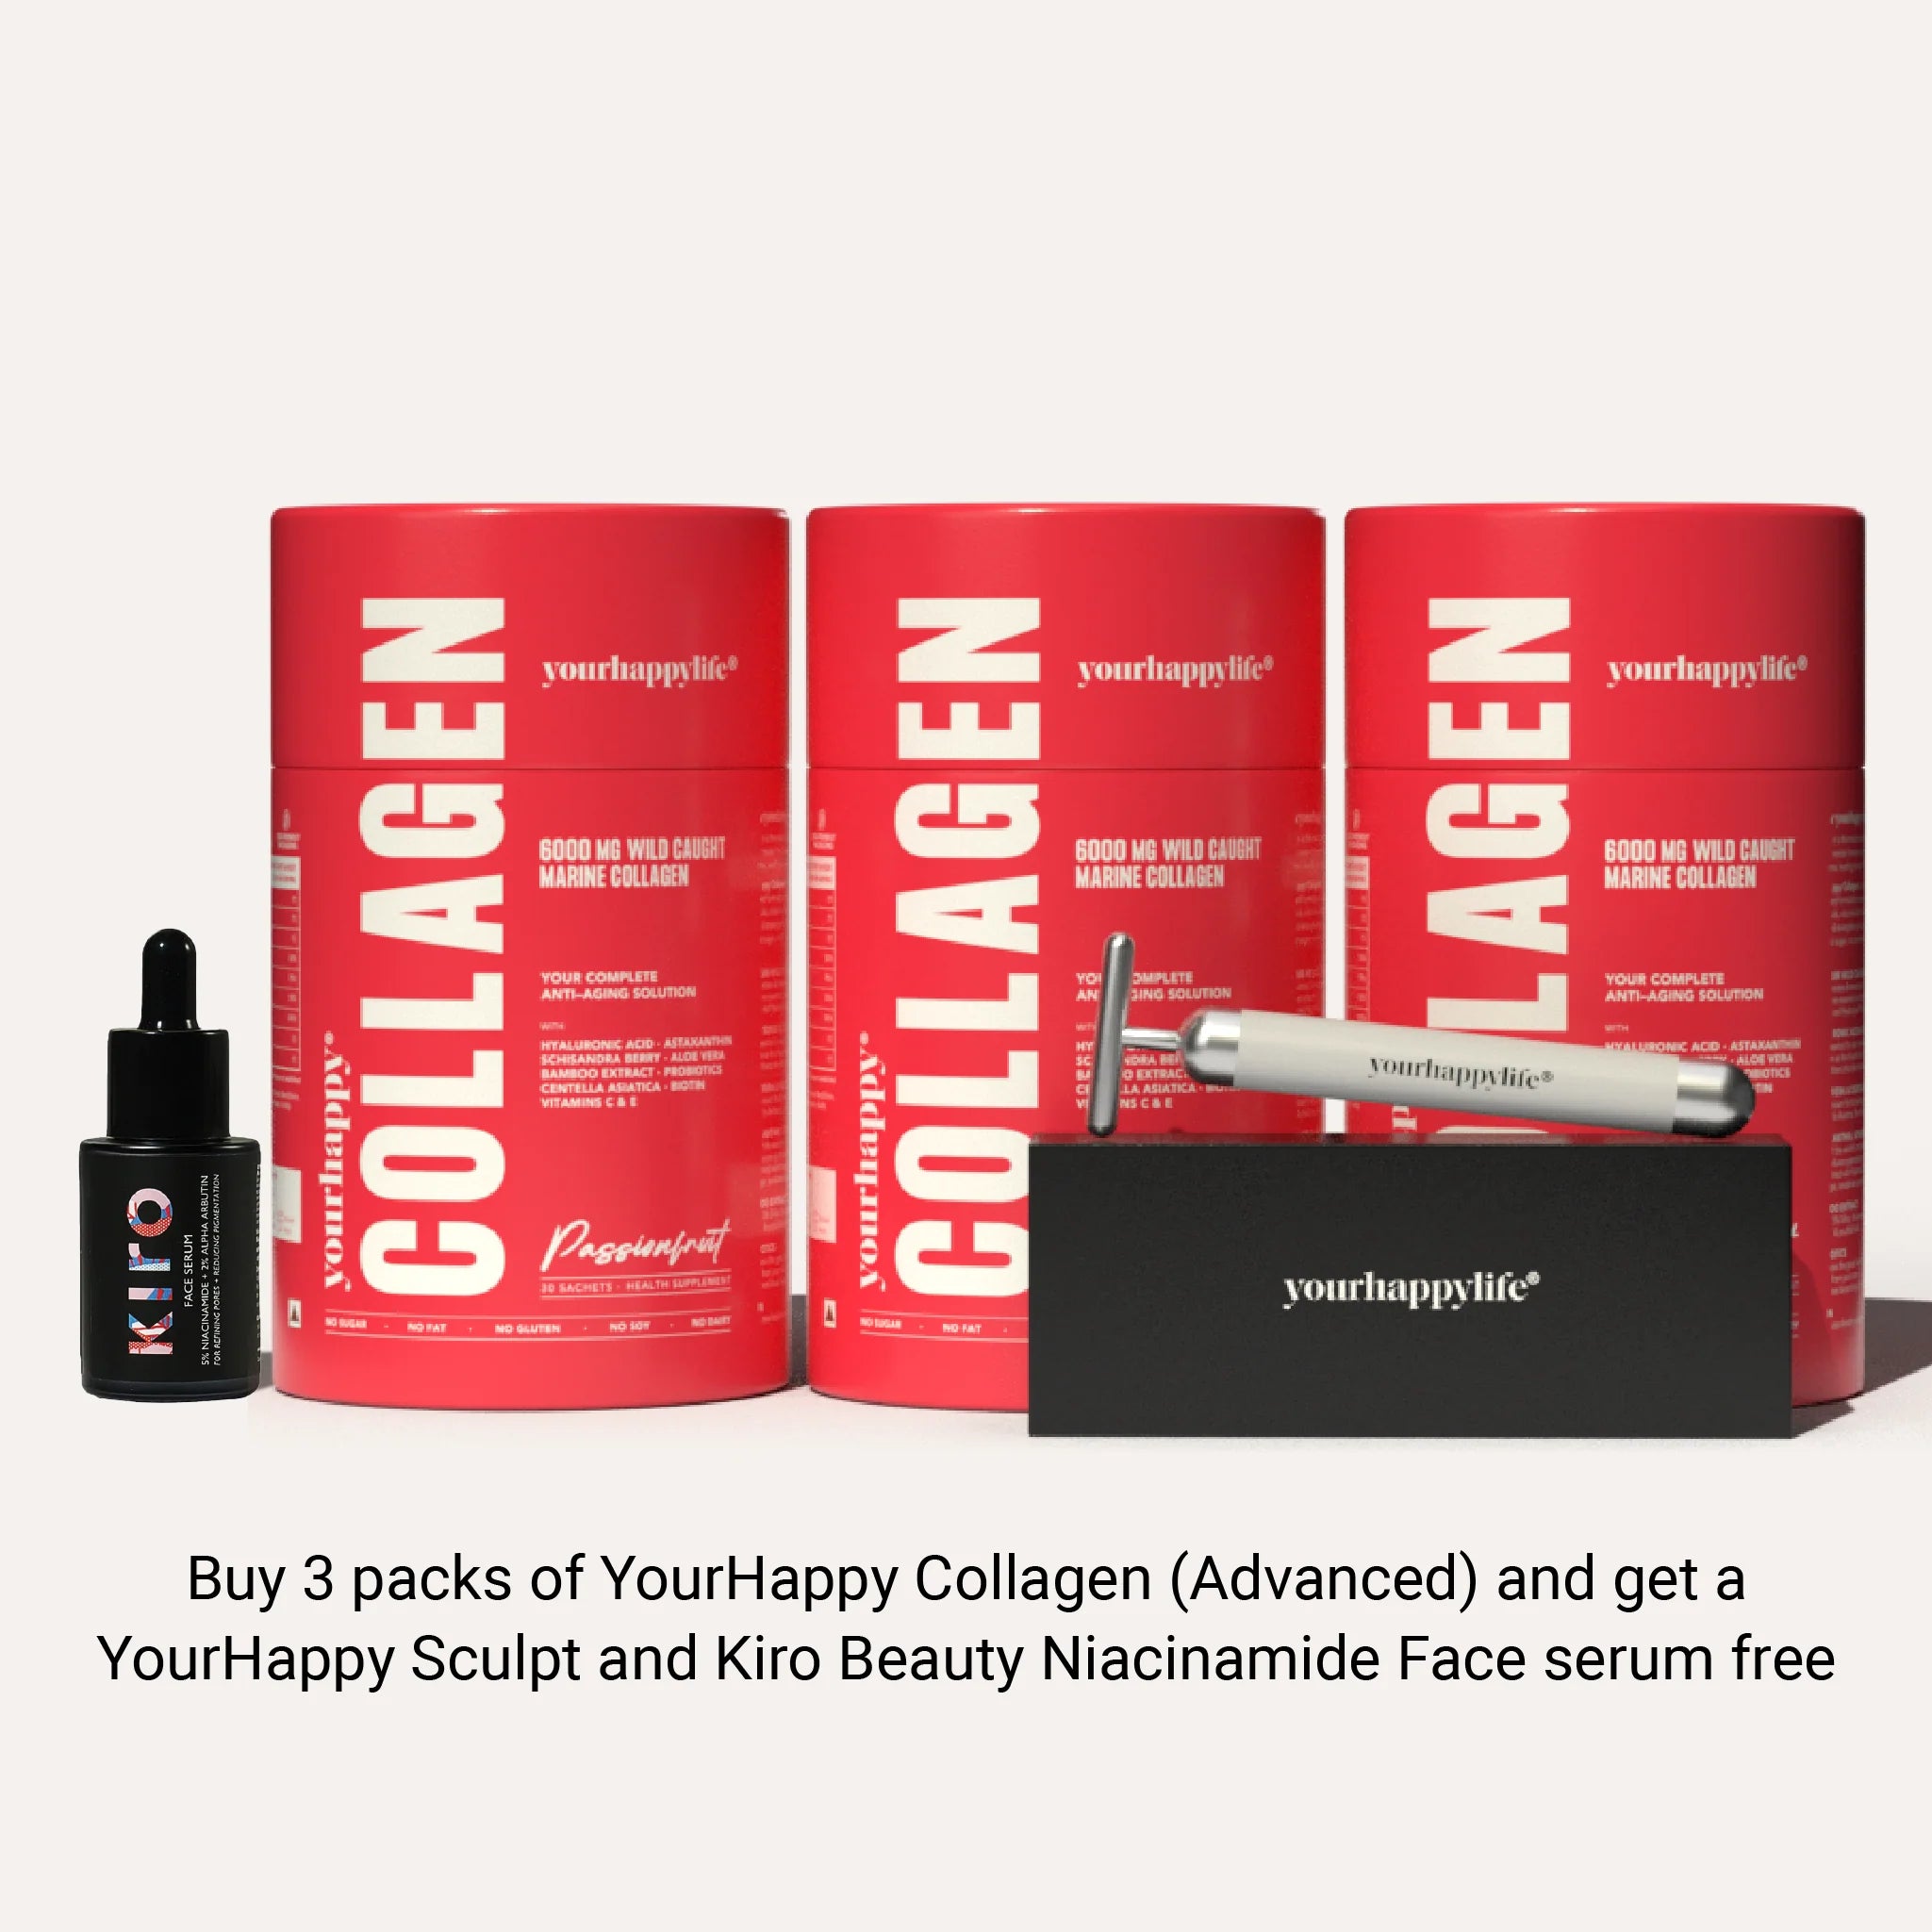 YourHappy Collagen (Advanced) Pack of 3 + Kiro Beauty Niacinamide Face Serum + T-Roller